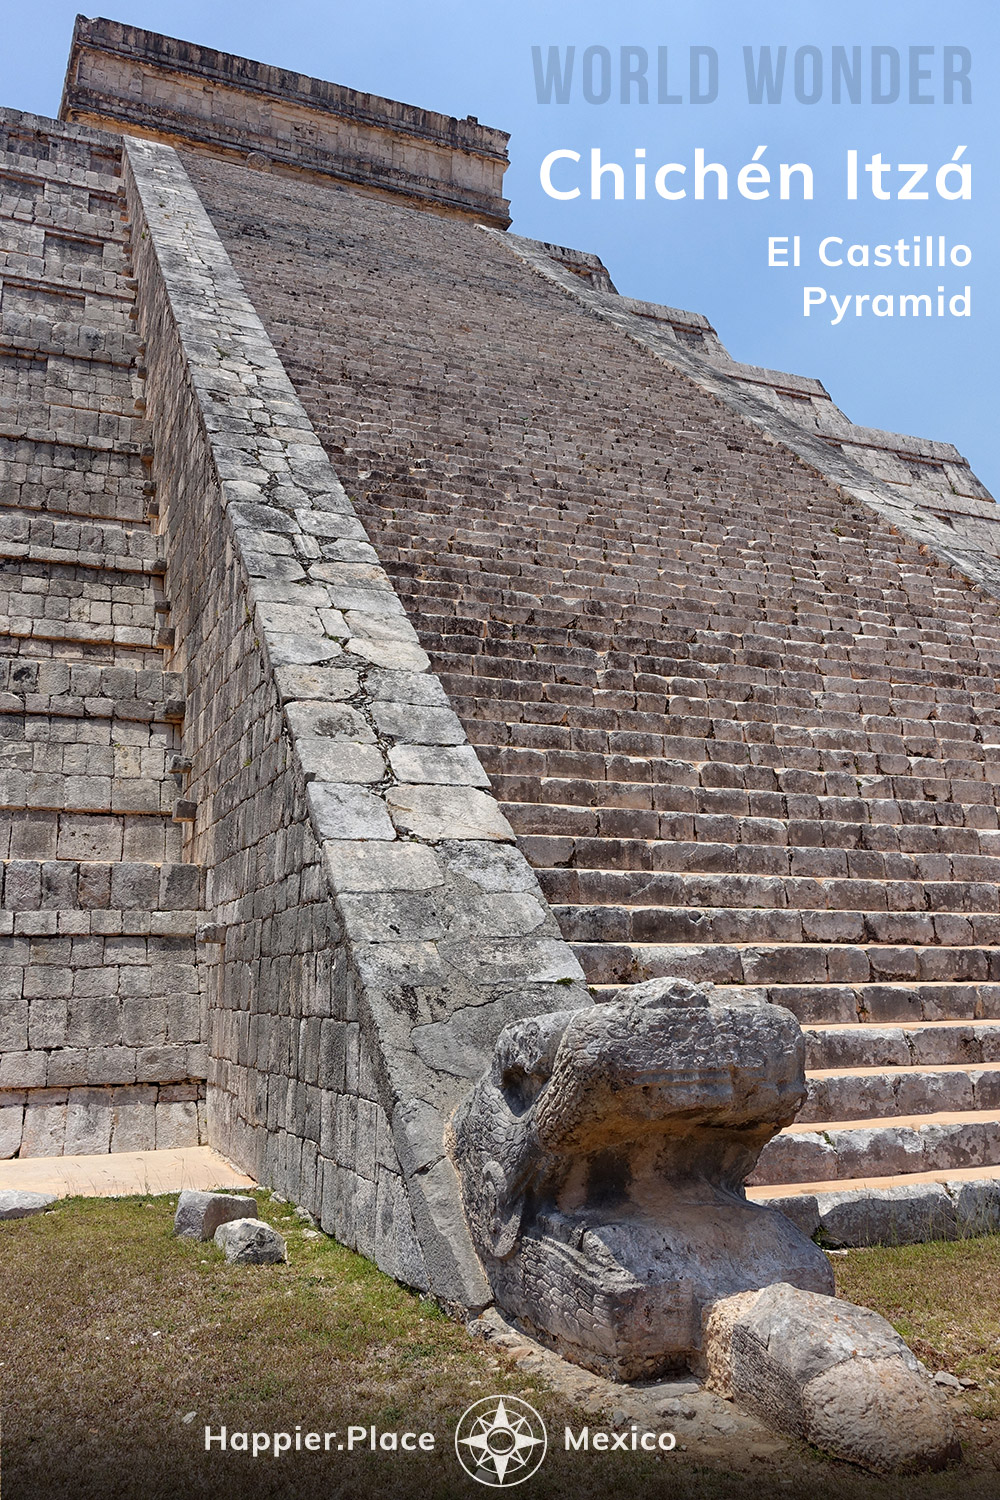 World Wonder El Castillo pyramid, Chichen Itza, Yucatan, Mexico, serpent head and stairs to Temple of Kukulcan, serpent deity, Happier Place